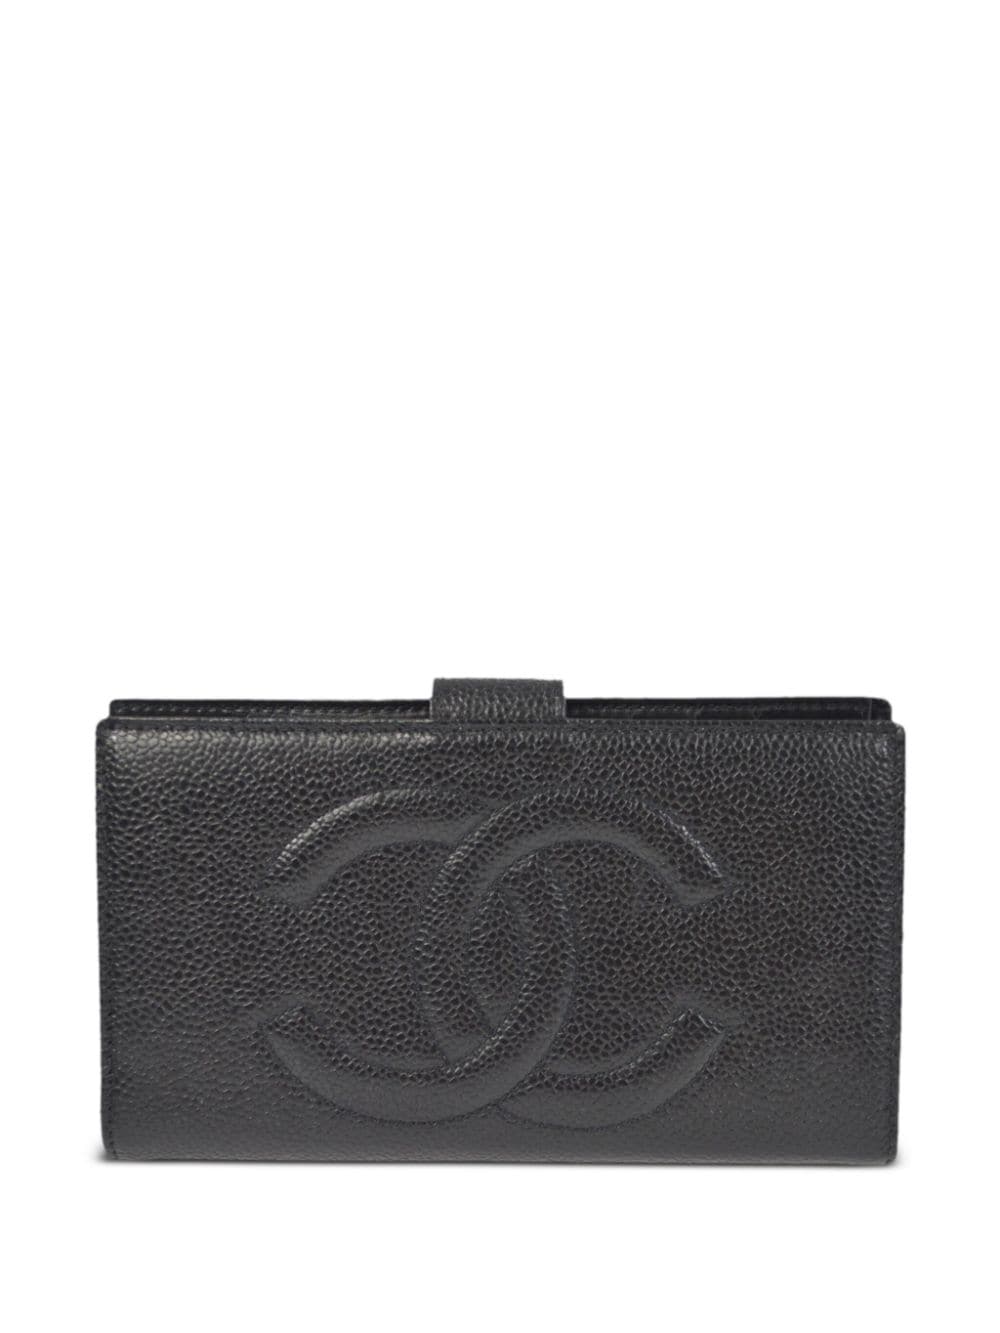 Pre-owned Chanel 1997 Cc Leather Wallet In Black